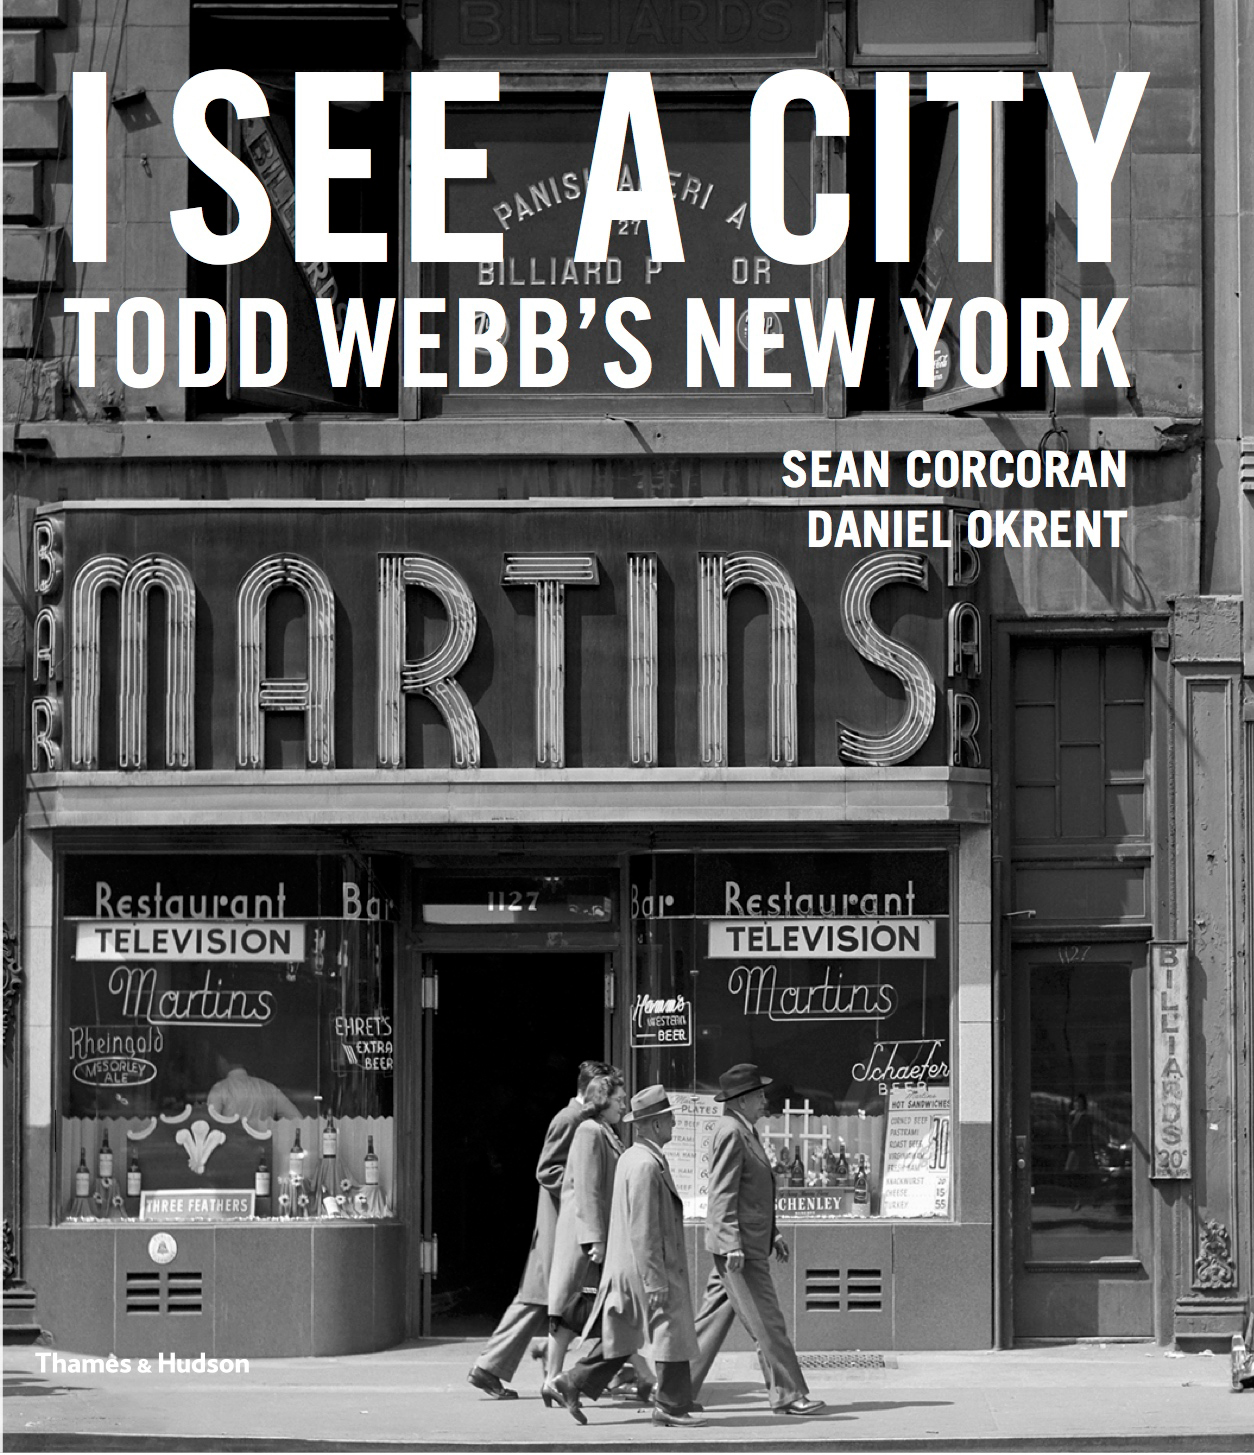 Todd Webb's New York book cover published by Thames & Hudson.